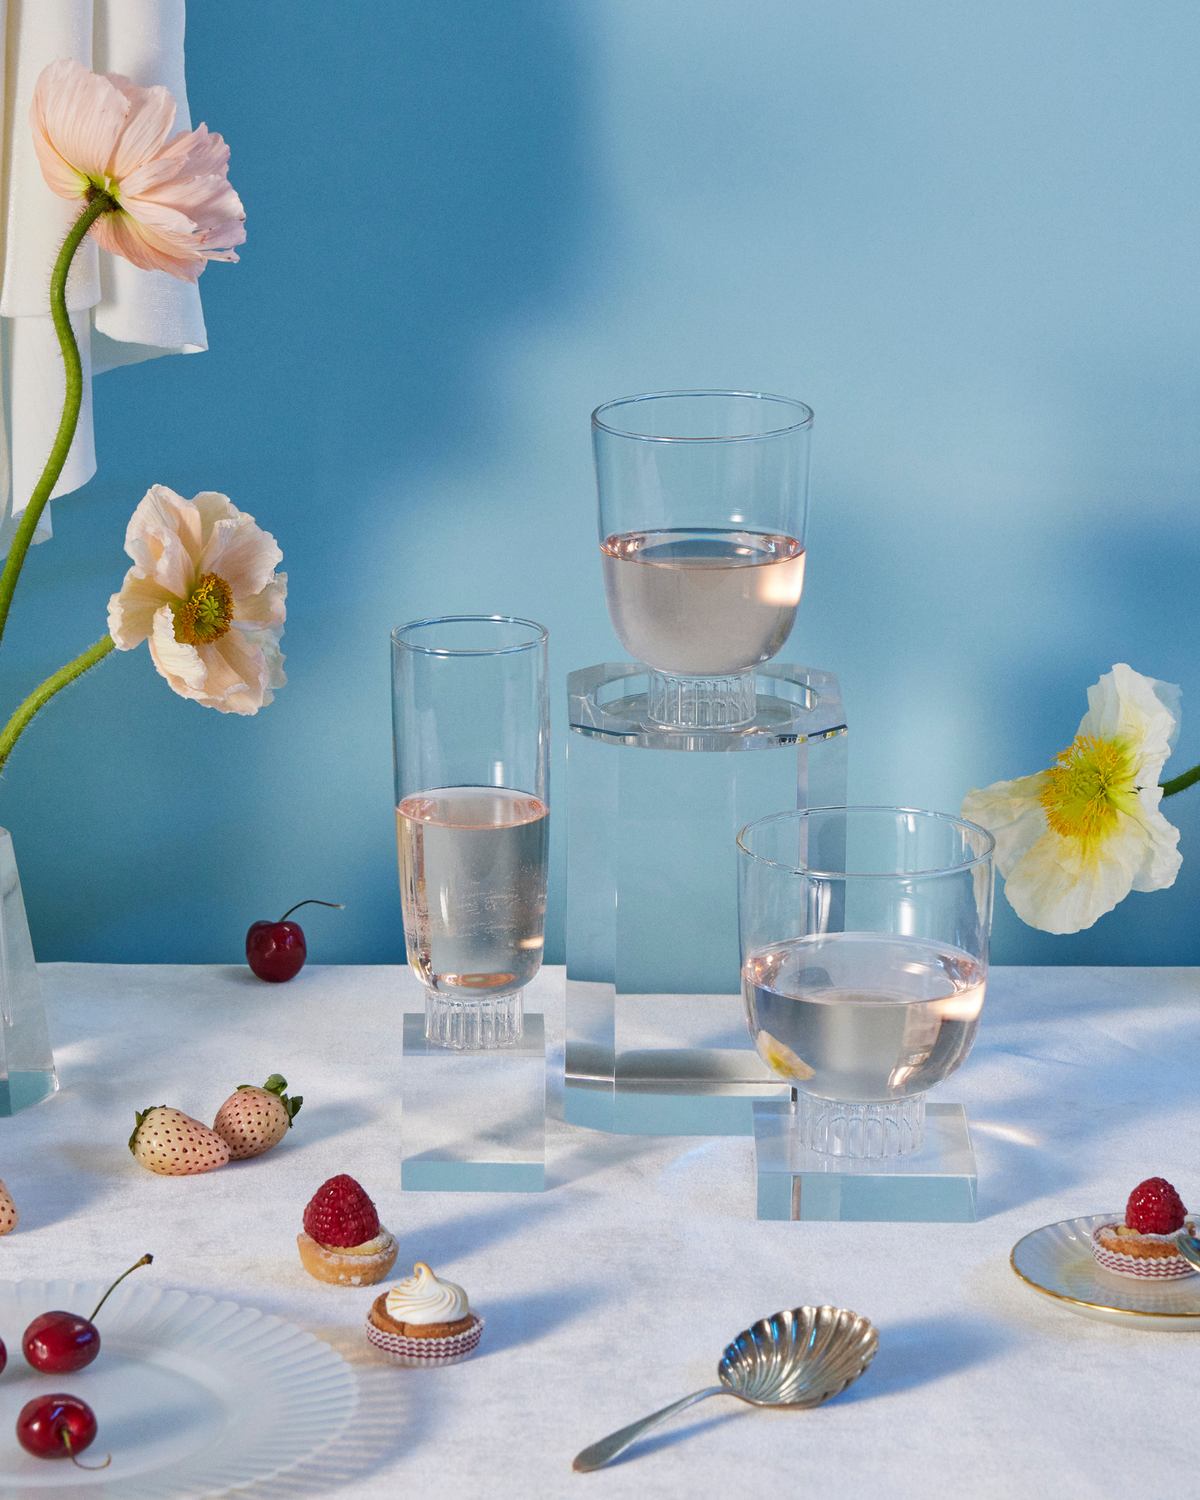 Sprezz clear romantic champagne flute, cocktail glass, and stemless wine glass filled with rose surrounded by flowers, fruits, and dessert. These glasses are lead-free, dishwasher safe and stackable. The fluted bottoms lend a touch of effortless elegance to any party or dinner table. Made of 100% borosilicate which makes them lightweight yet durable and dishwasher safe